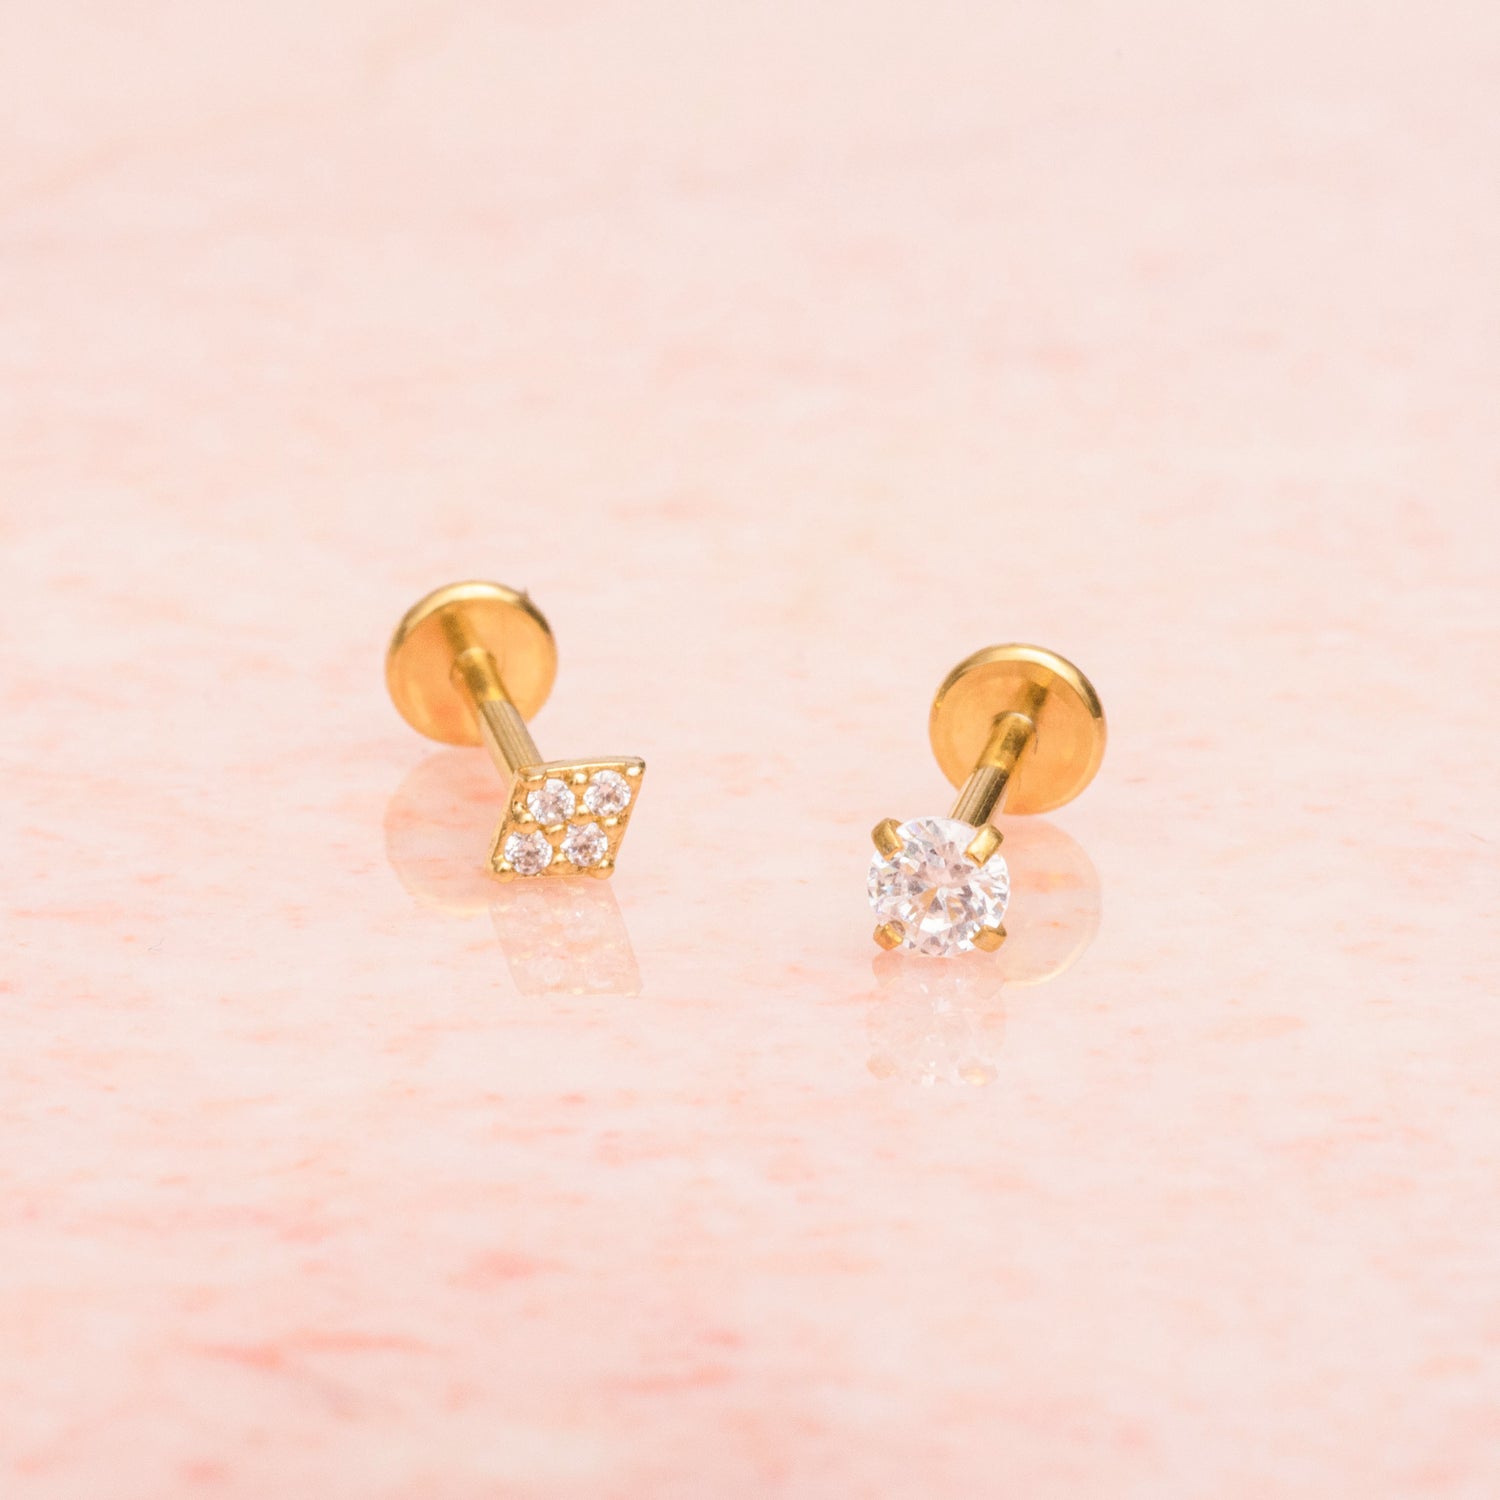 Ear Stud for Cartilage With Flat Back 18G Tiny Minimalist Stud Earring  Tragus Helix Cartilage Conch 14k Solid Gold Body Jewellery 